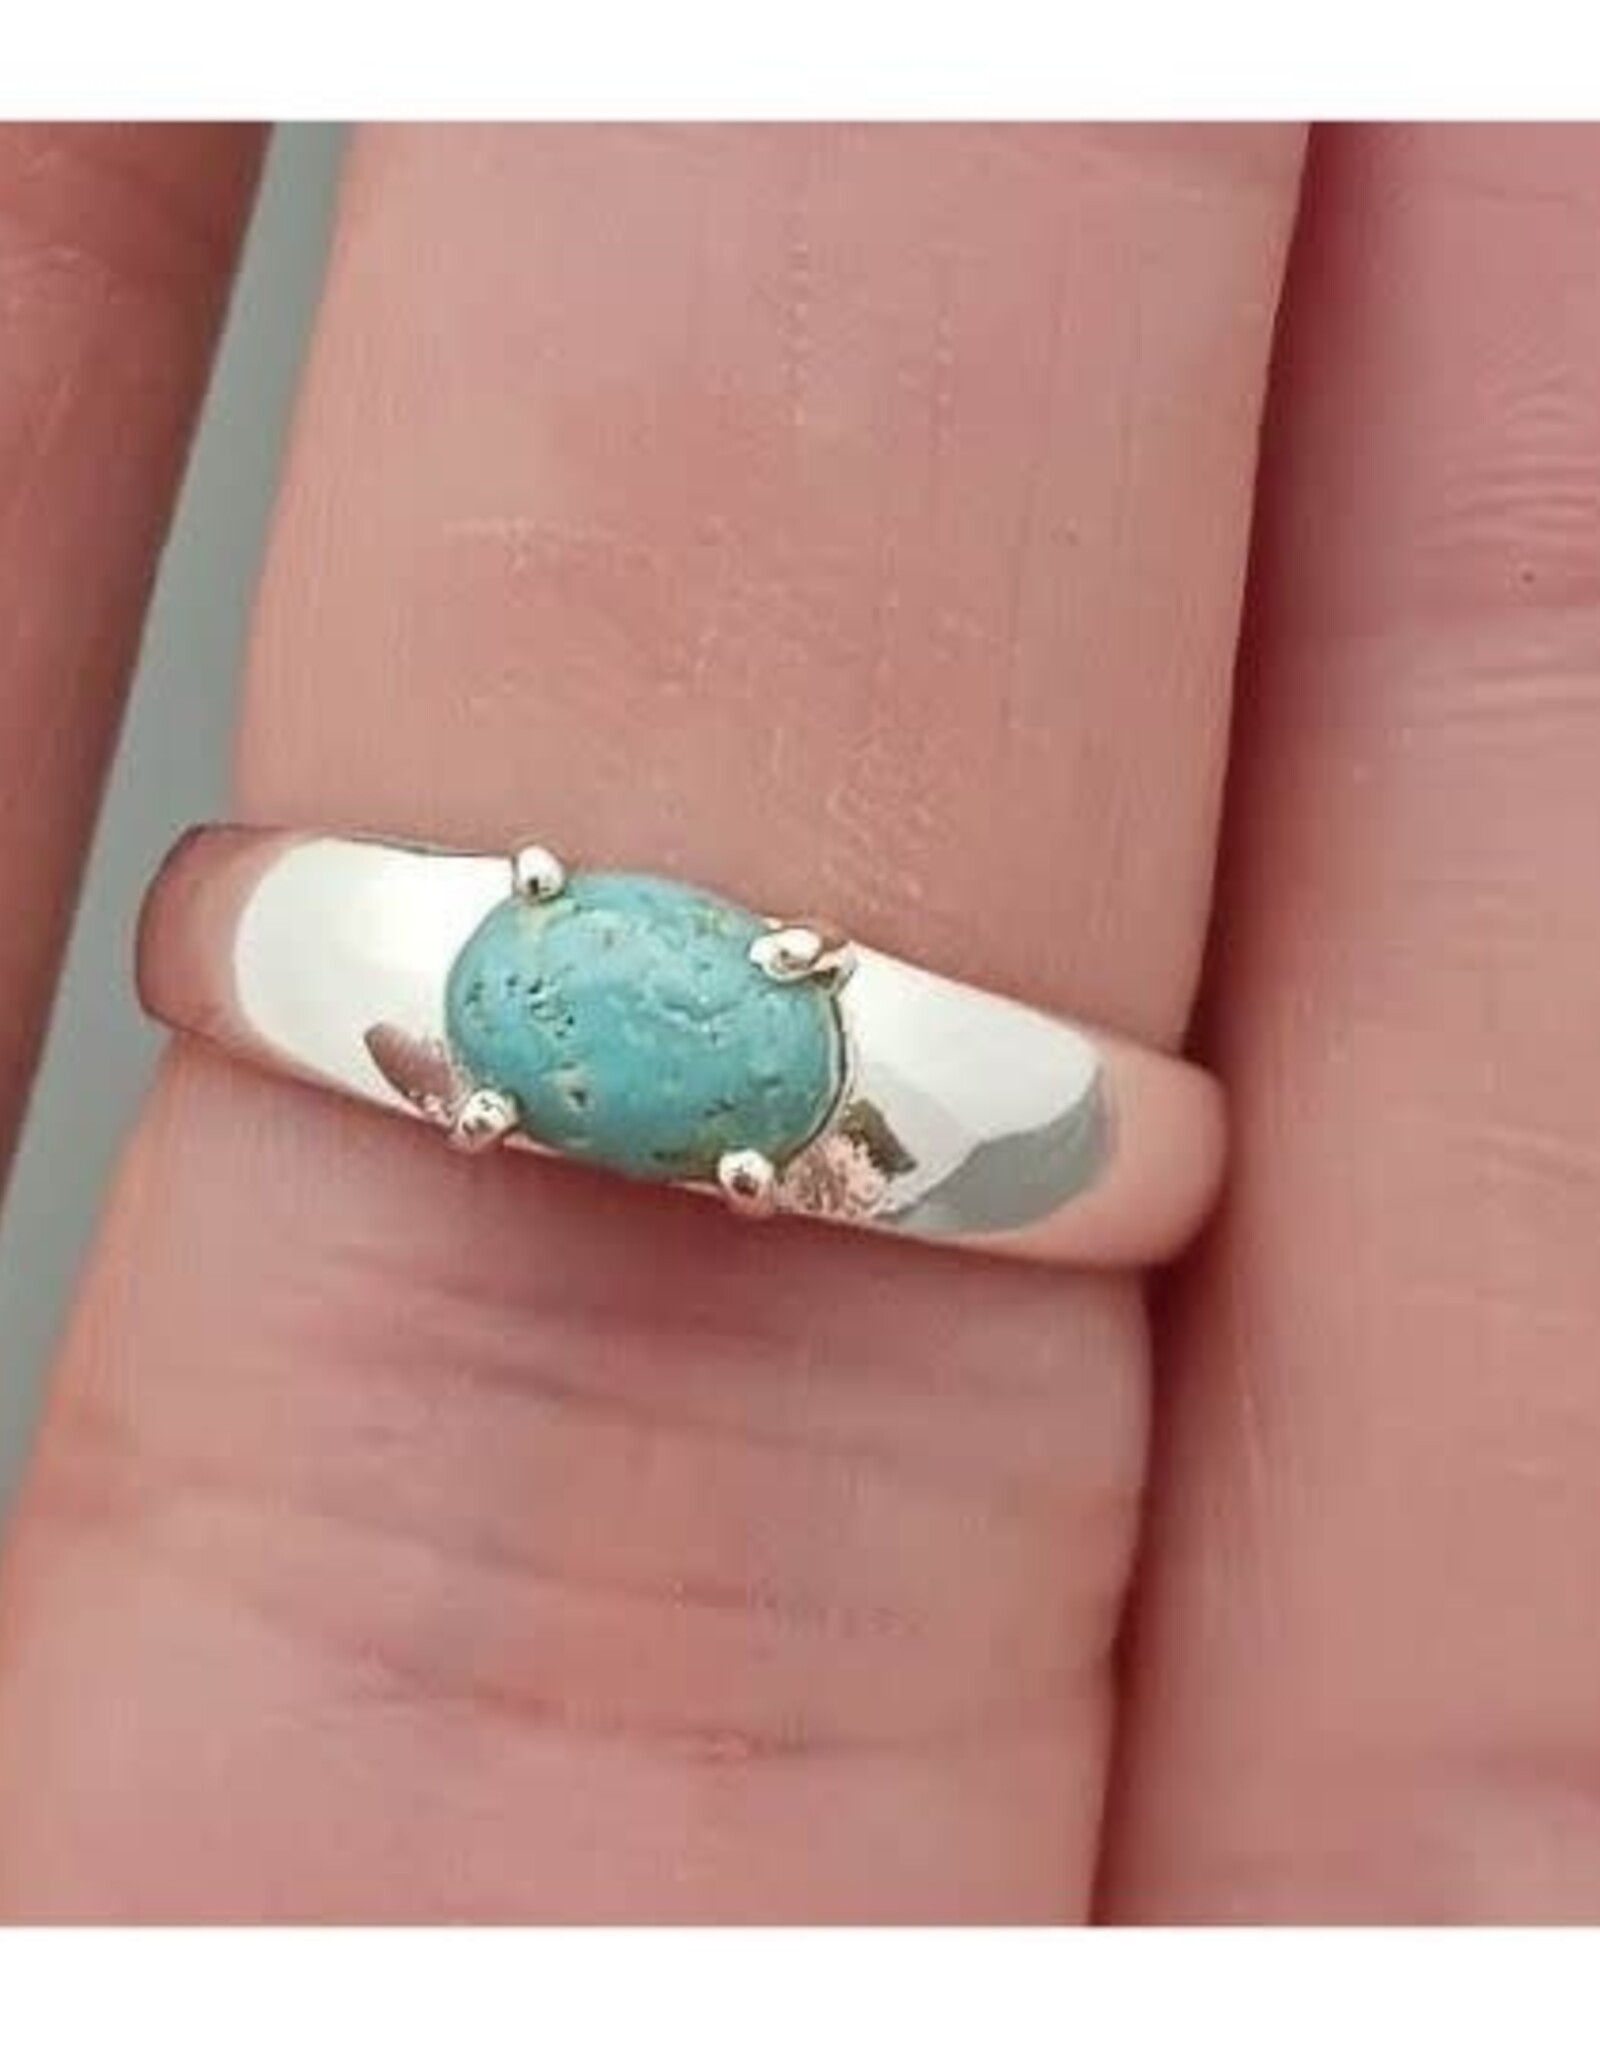 Turquoise Ring  B - Size 8 Sterling Silver